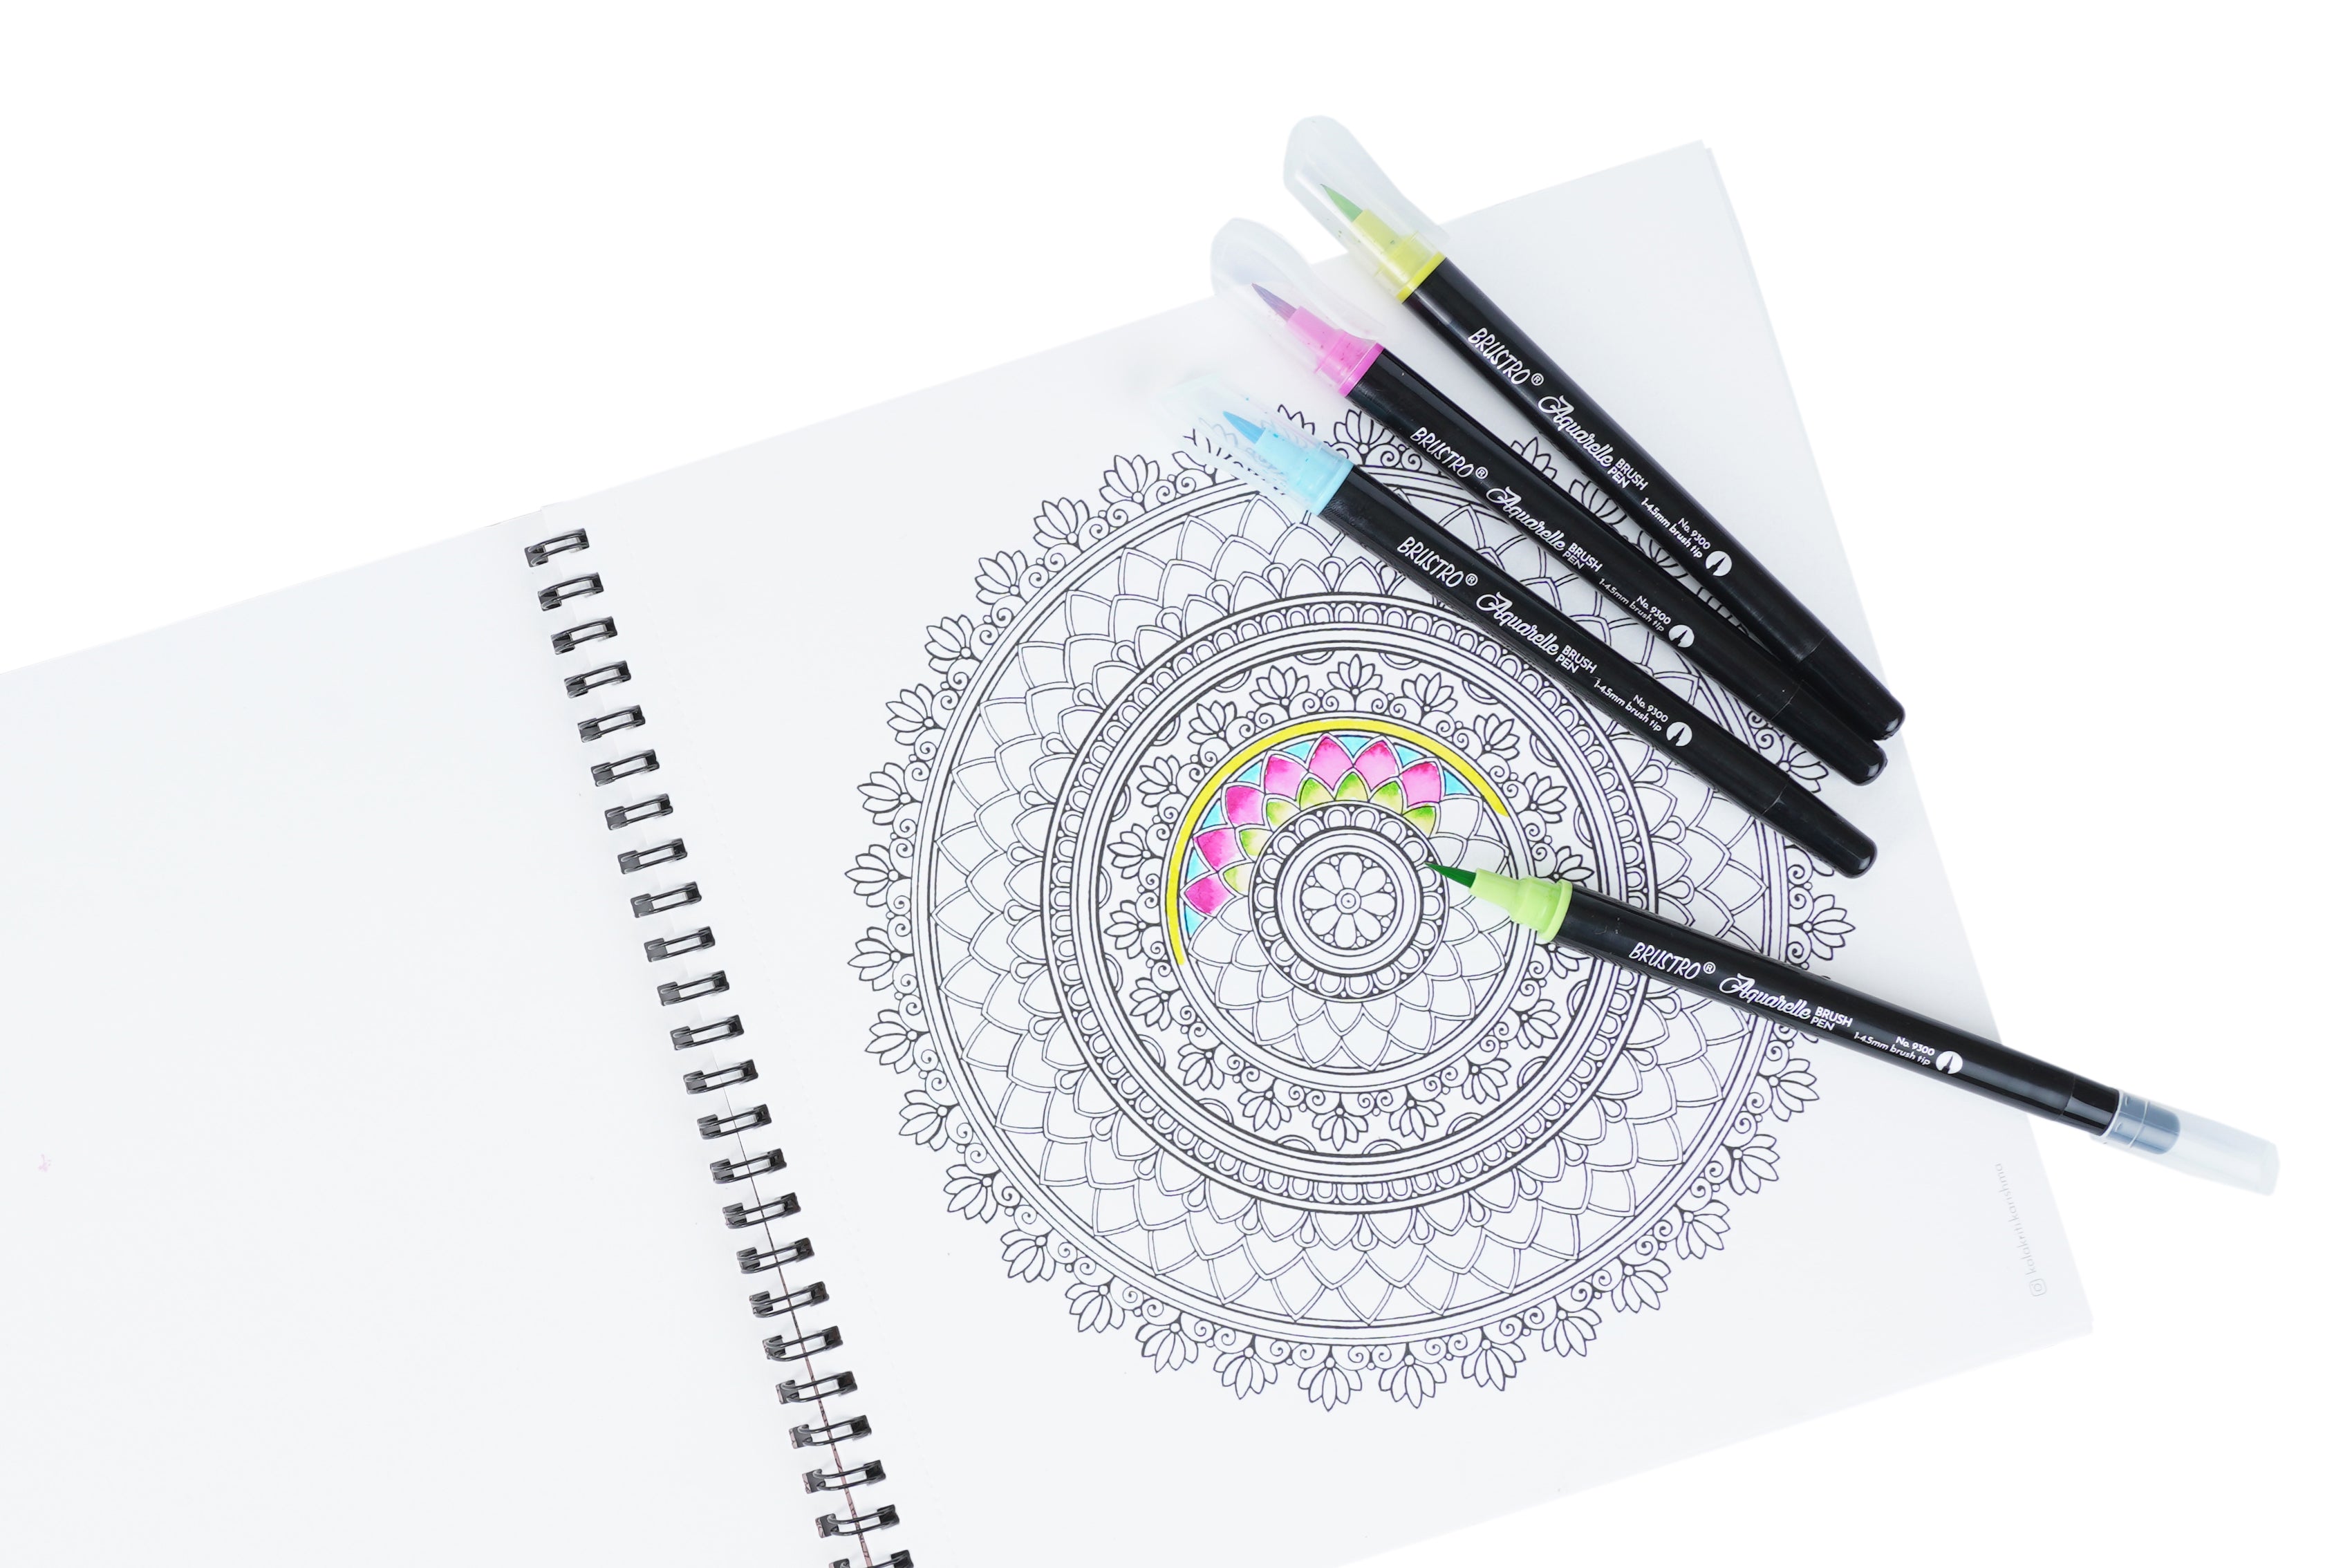 What pens are best to use for doodling a mandala on paper  Quora